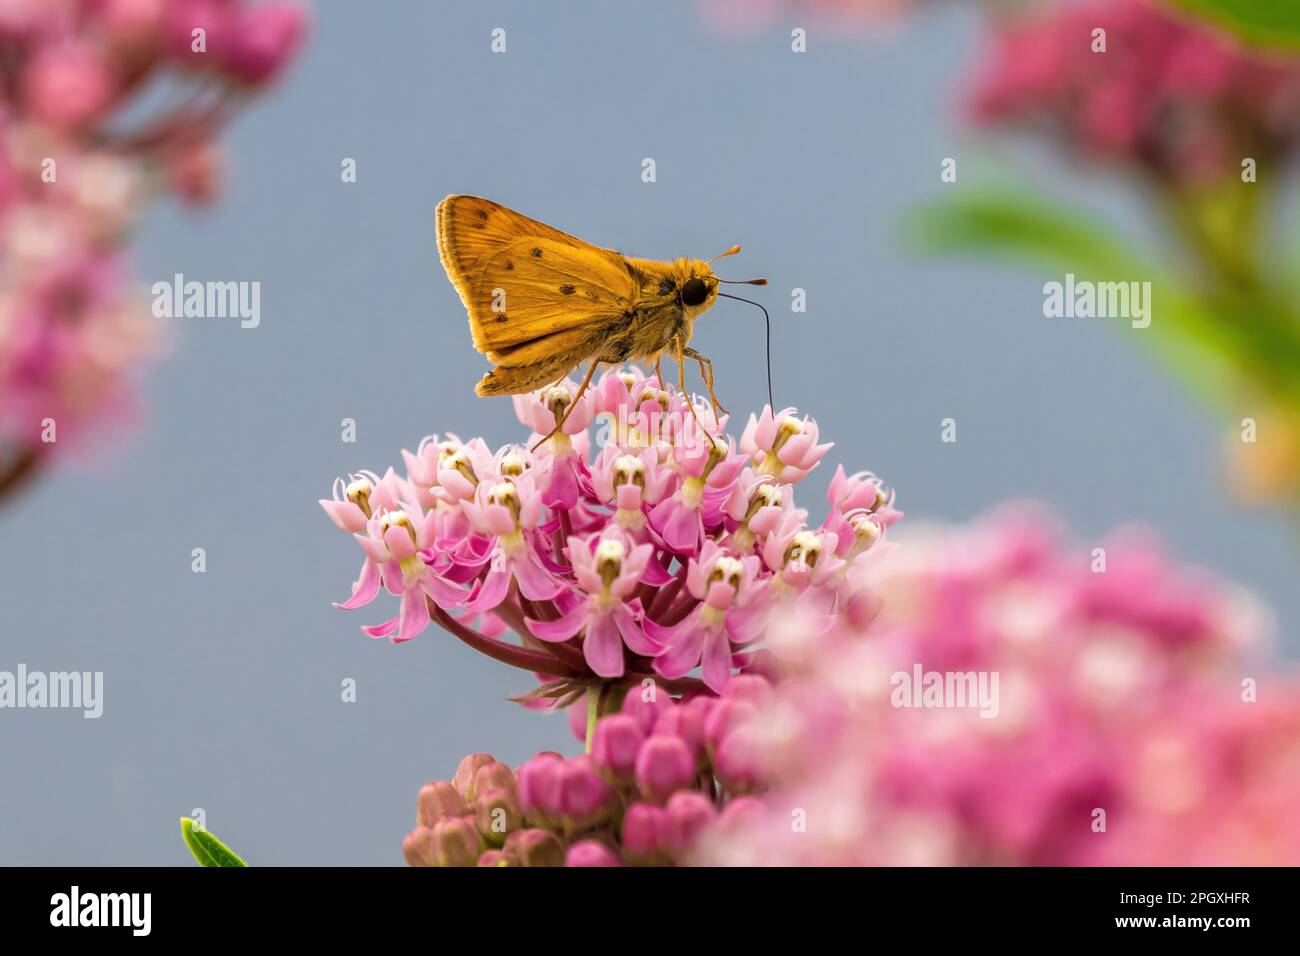 A Fiery Skipper pollinating on a Swamp Milkweed flower. Side profile with wing detail, closeup view. Stock Photo